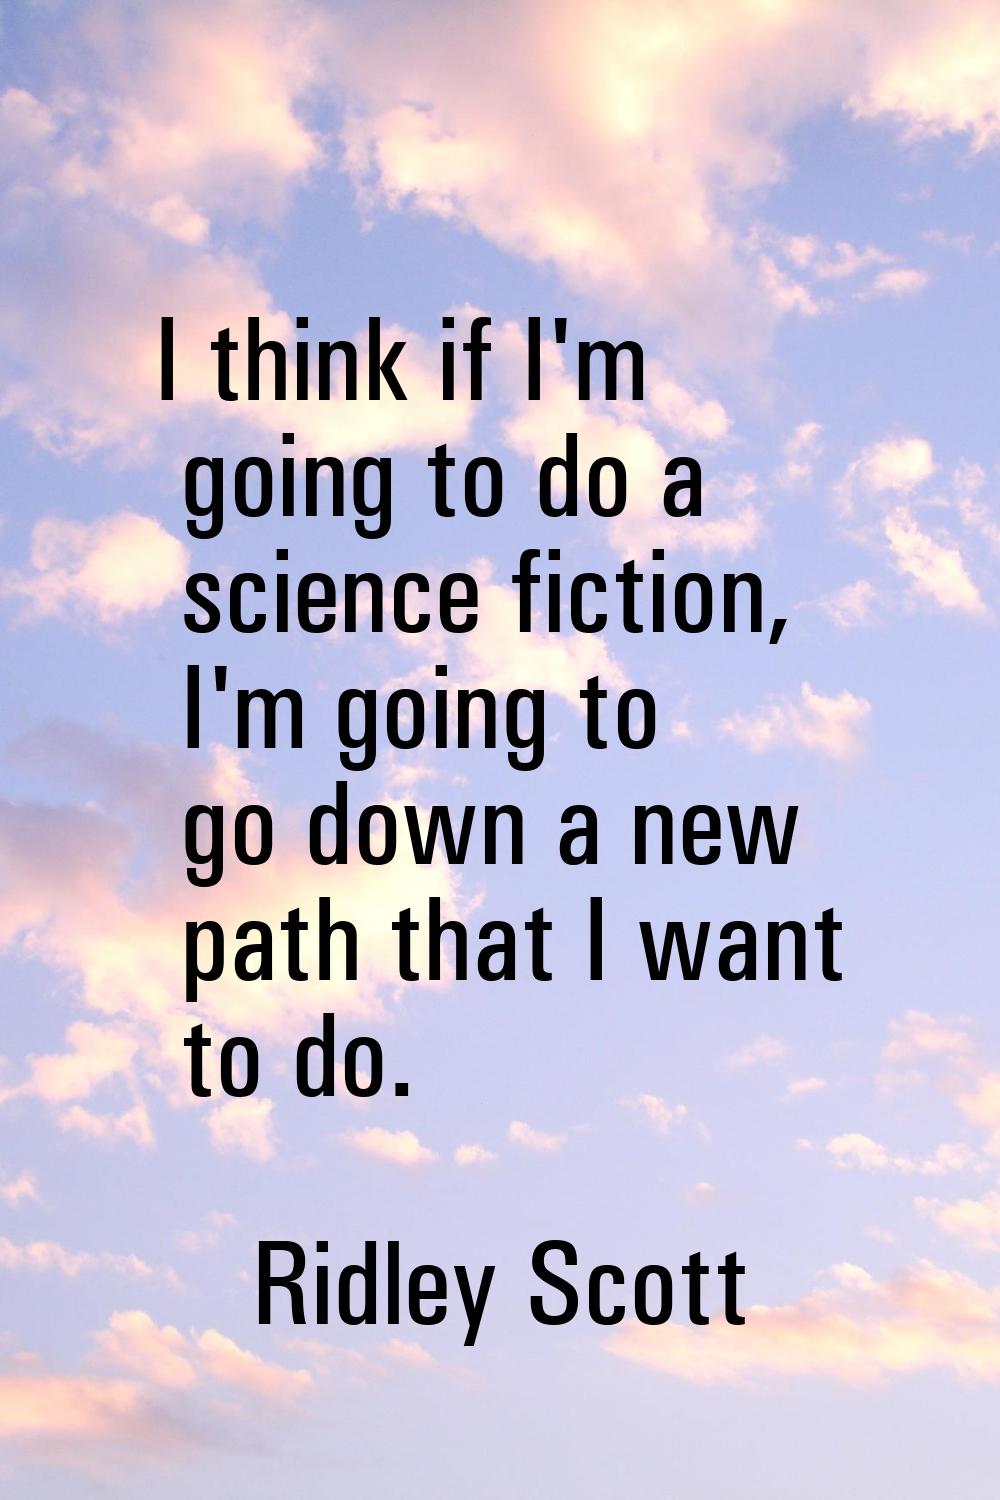 I think if I'm going to do a science fiction, I'm going to go down a new path that I want to do.